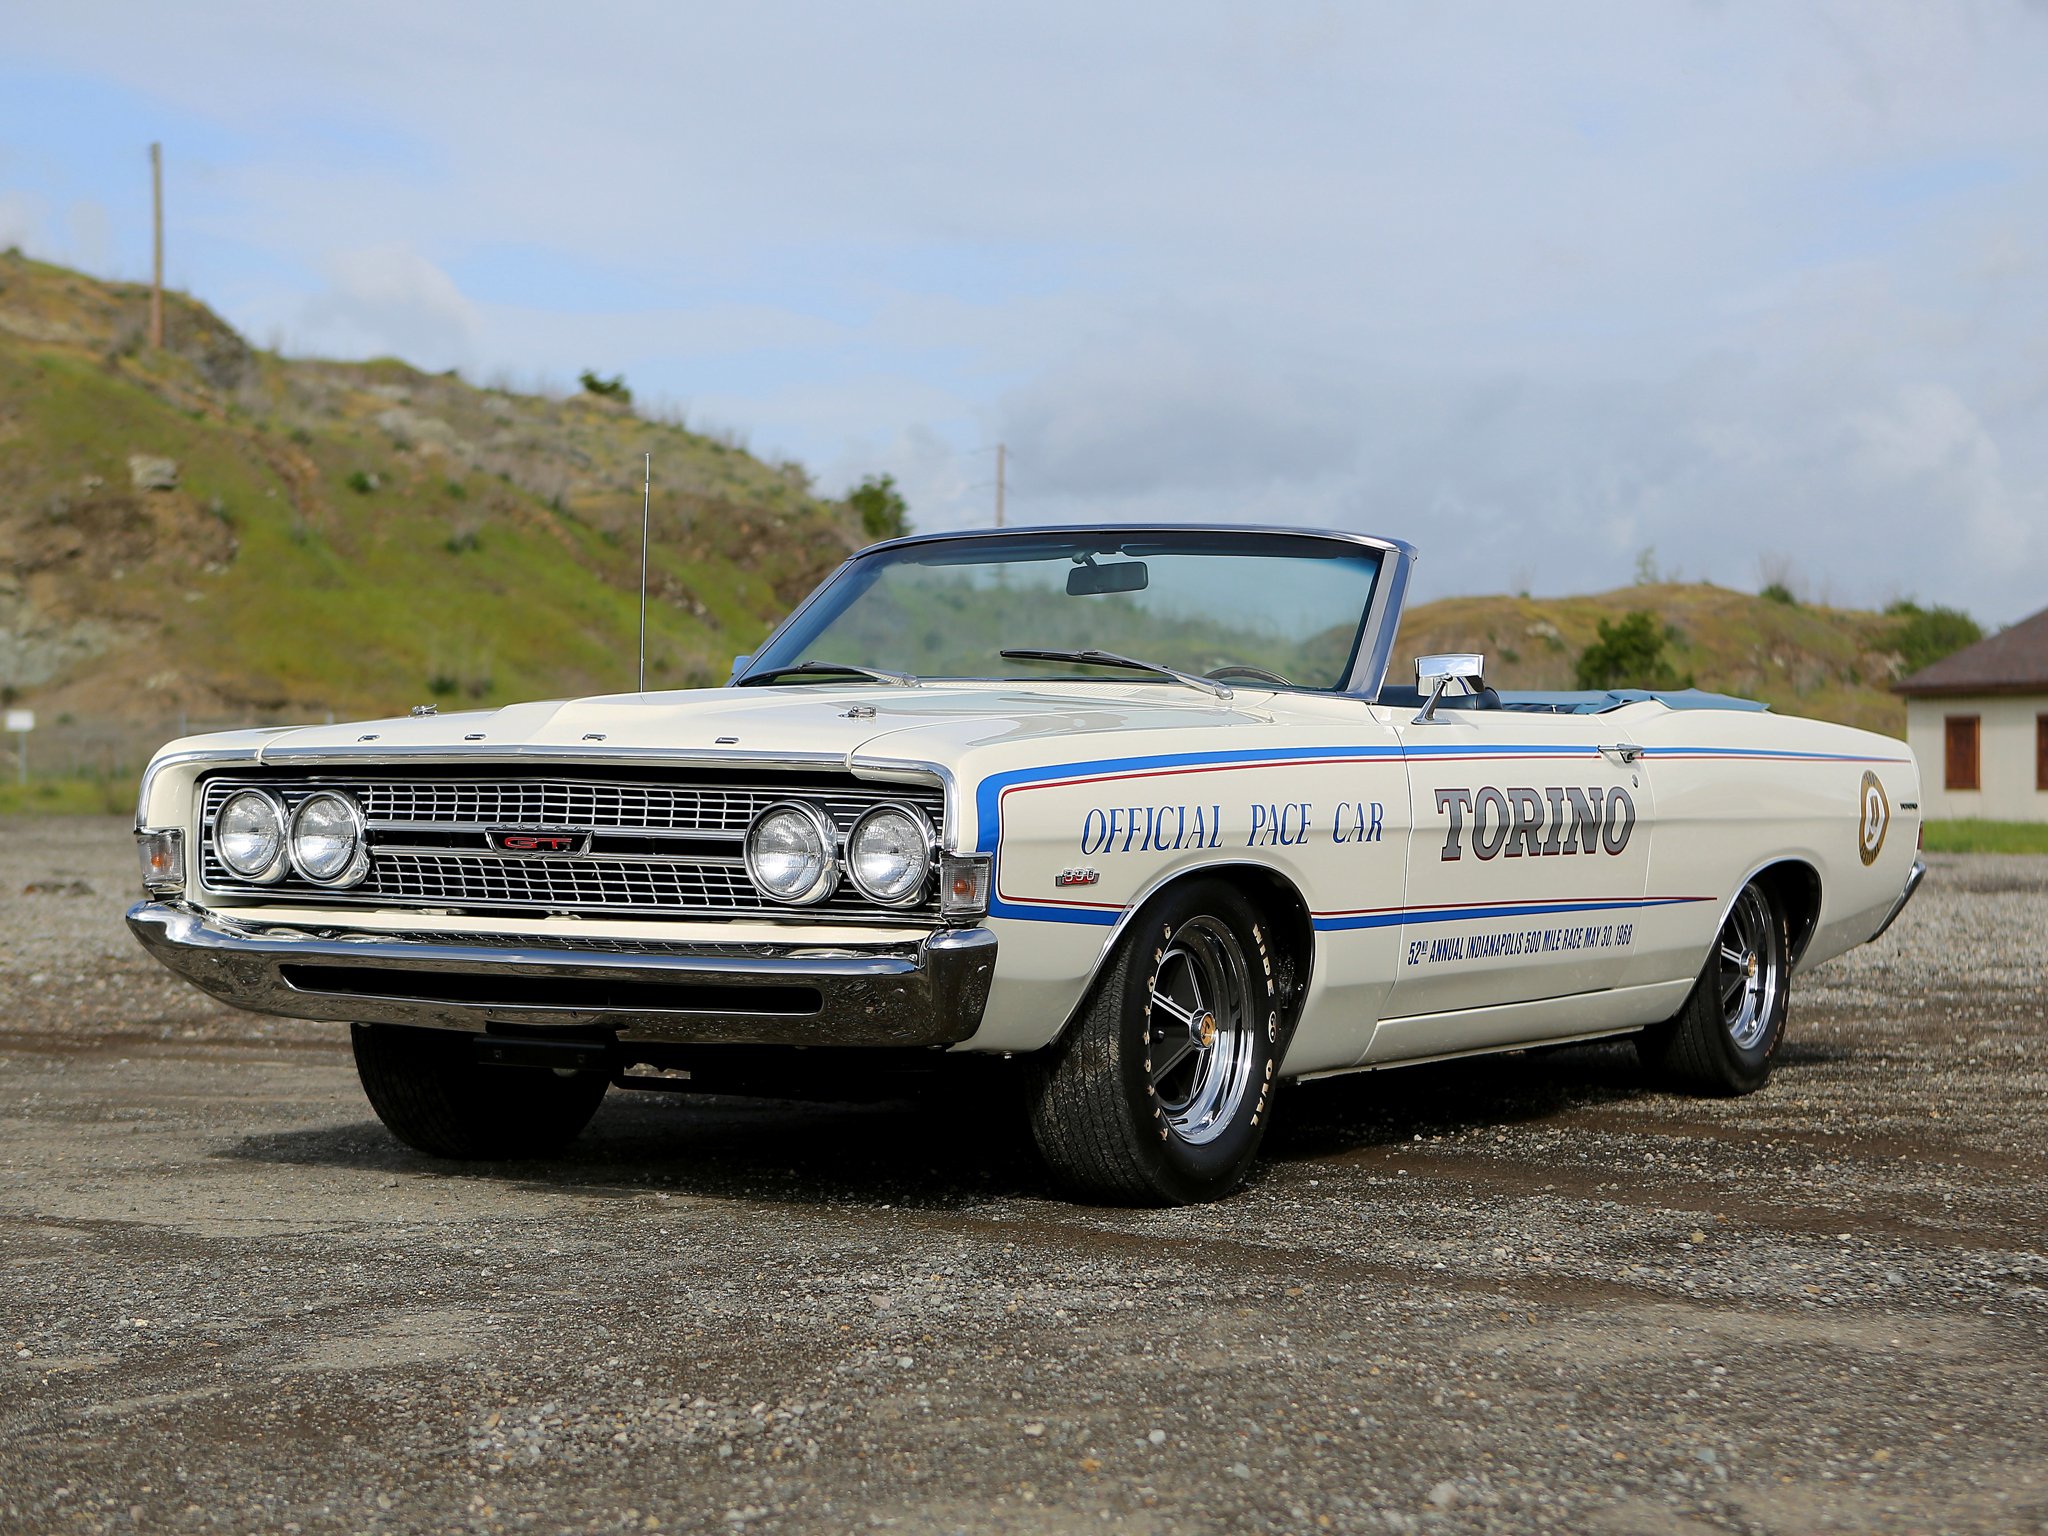 1968, Ford, Fairlane, Torino, G t, Convertible, Indy, 500, Pace, Muscle, Classic, Race, Racing Wallpaper